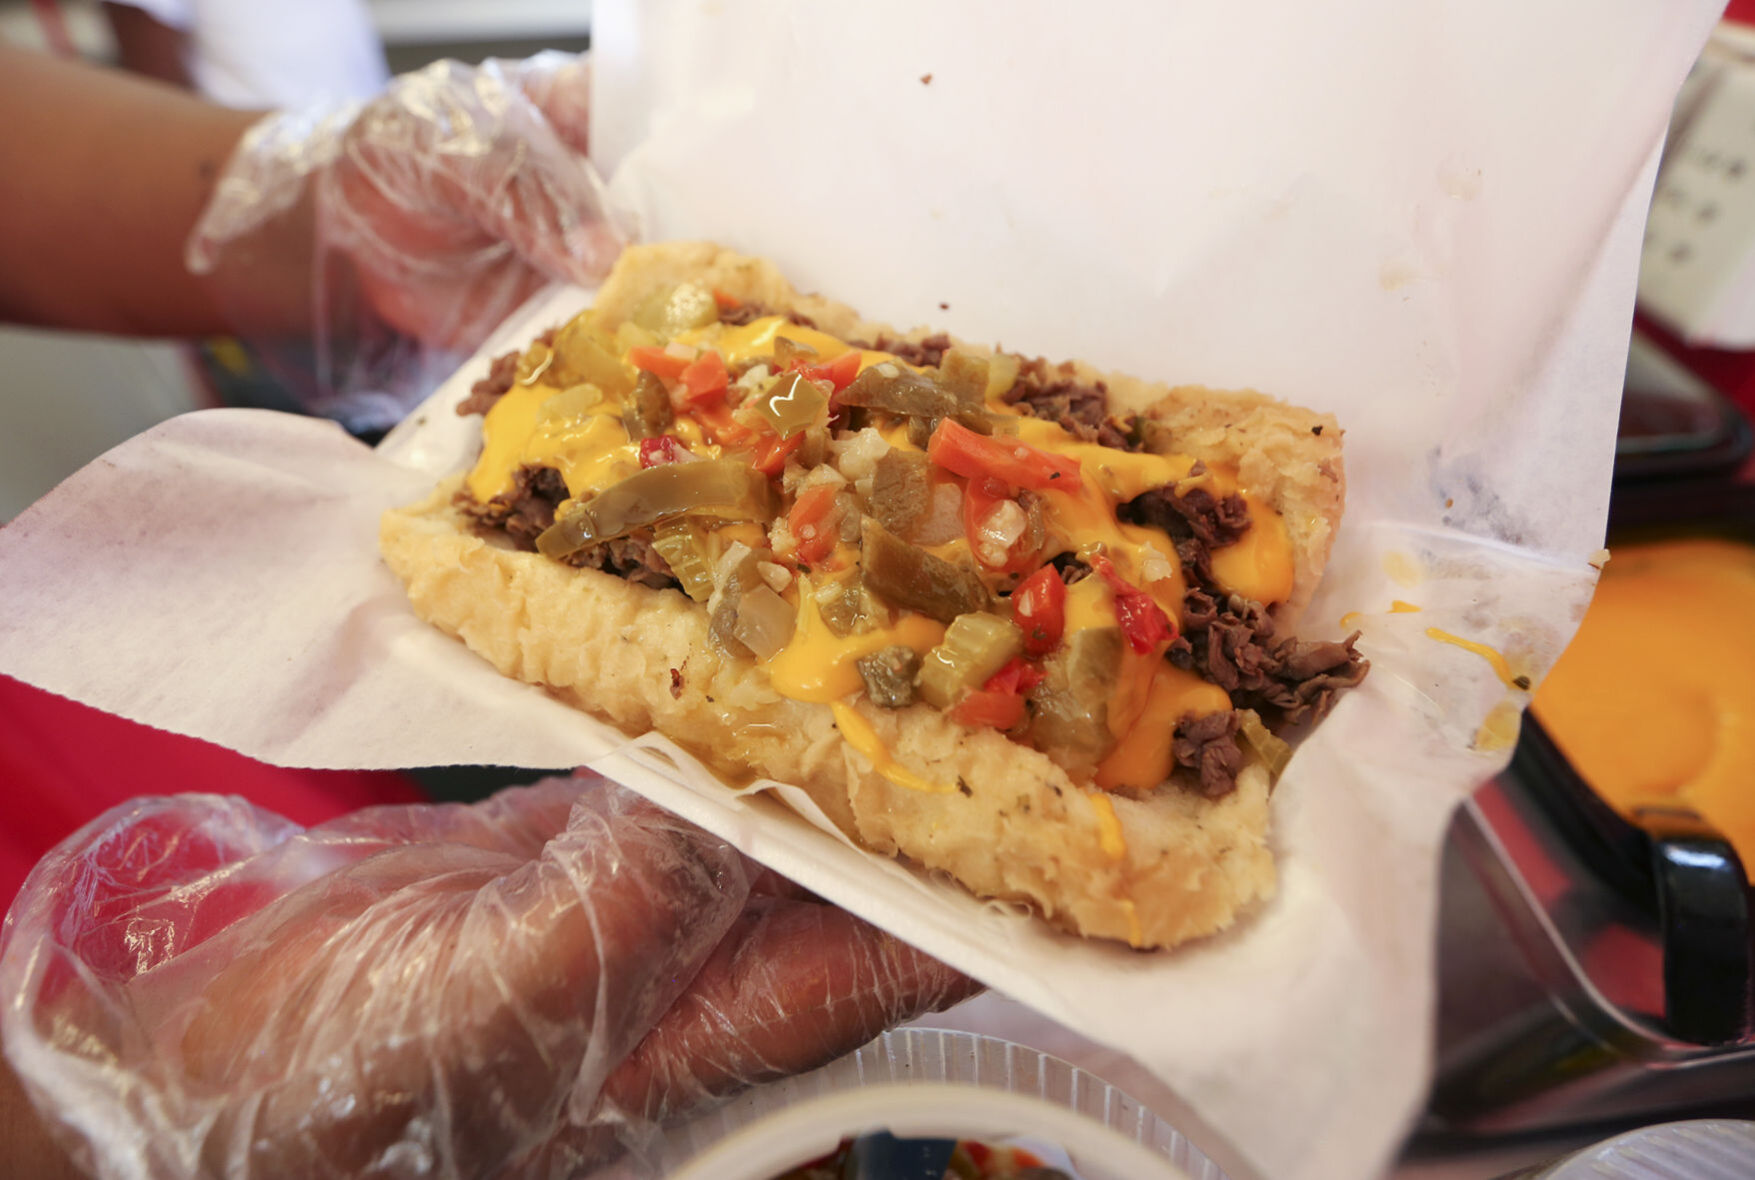 Italian beef is prepared at Hot Diggity Dogz in Dubuque on Friday, Aug. 7, 2020 PHOTO CREDIT: NICKI KOHL